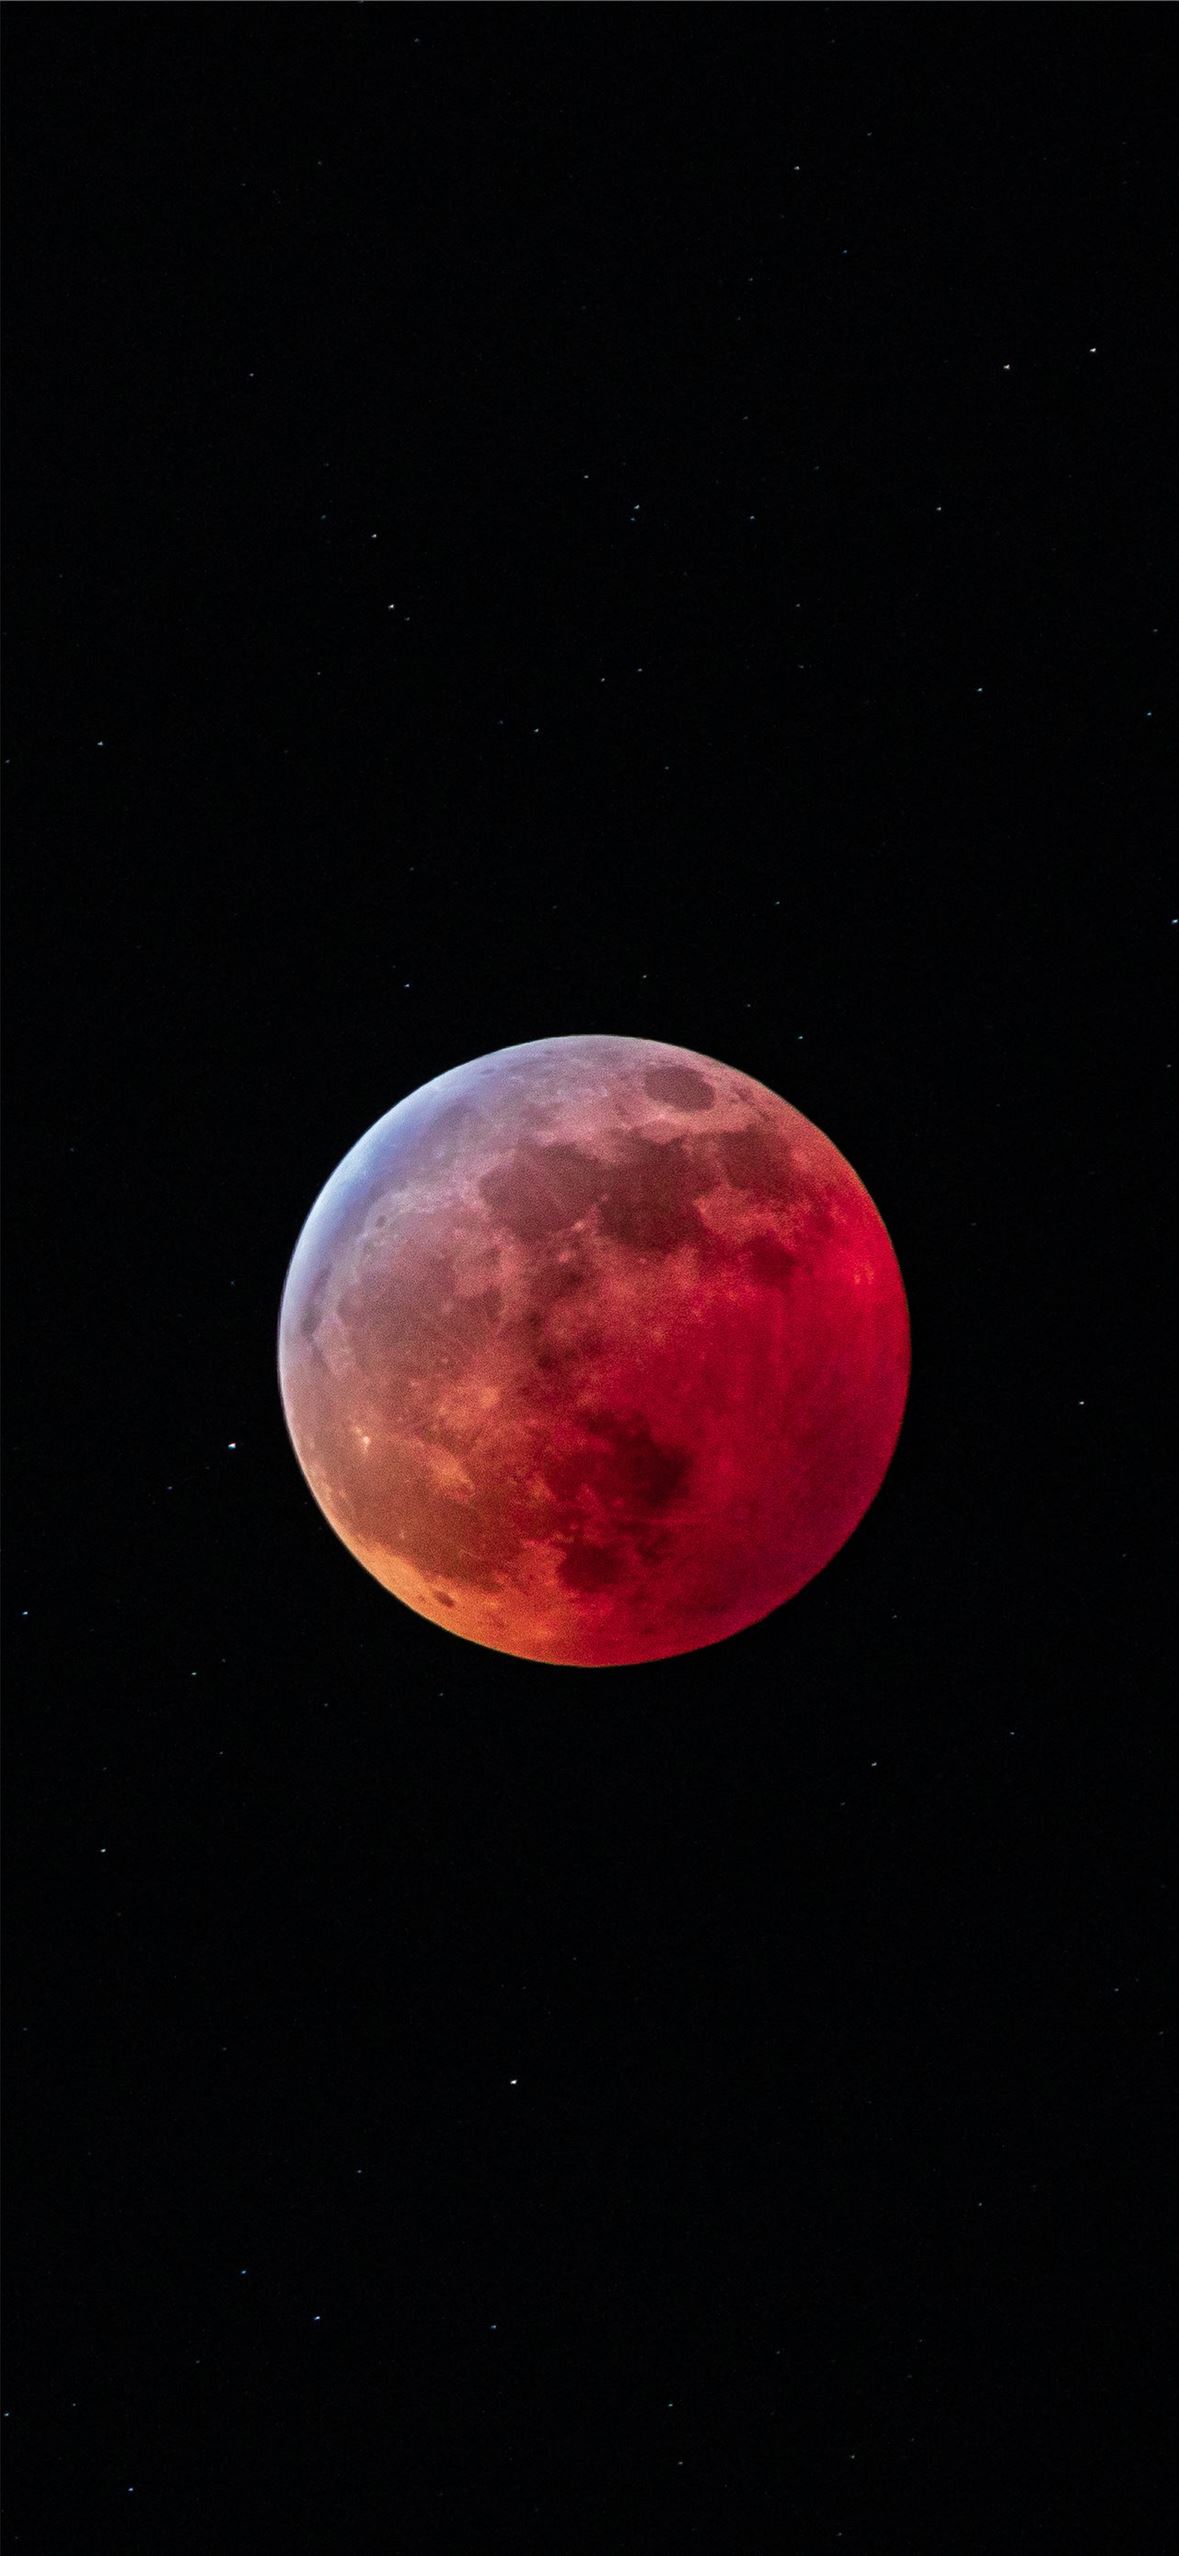 A red moon in the sky with stars - Blood